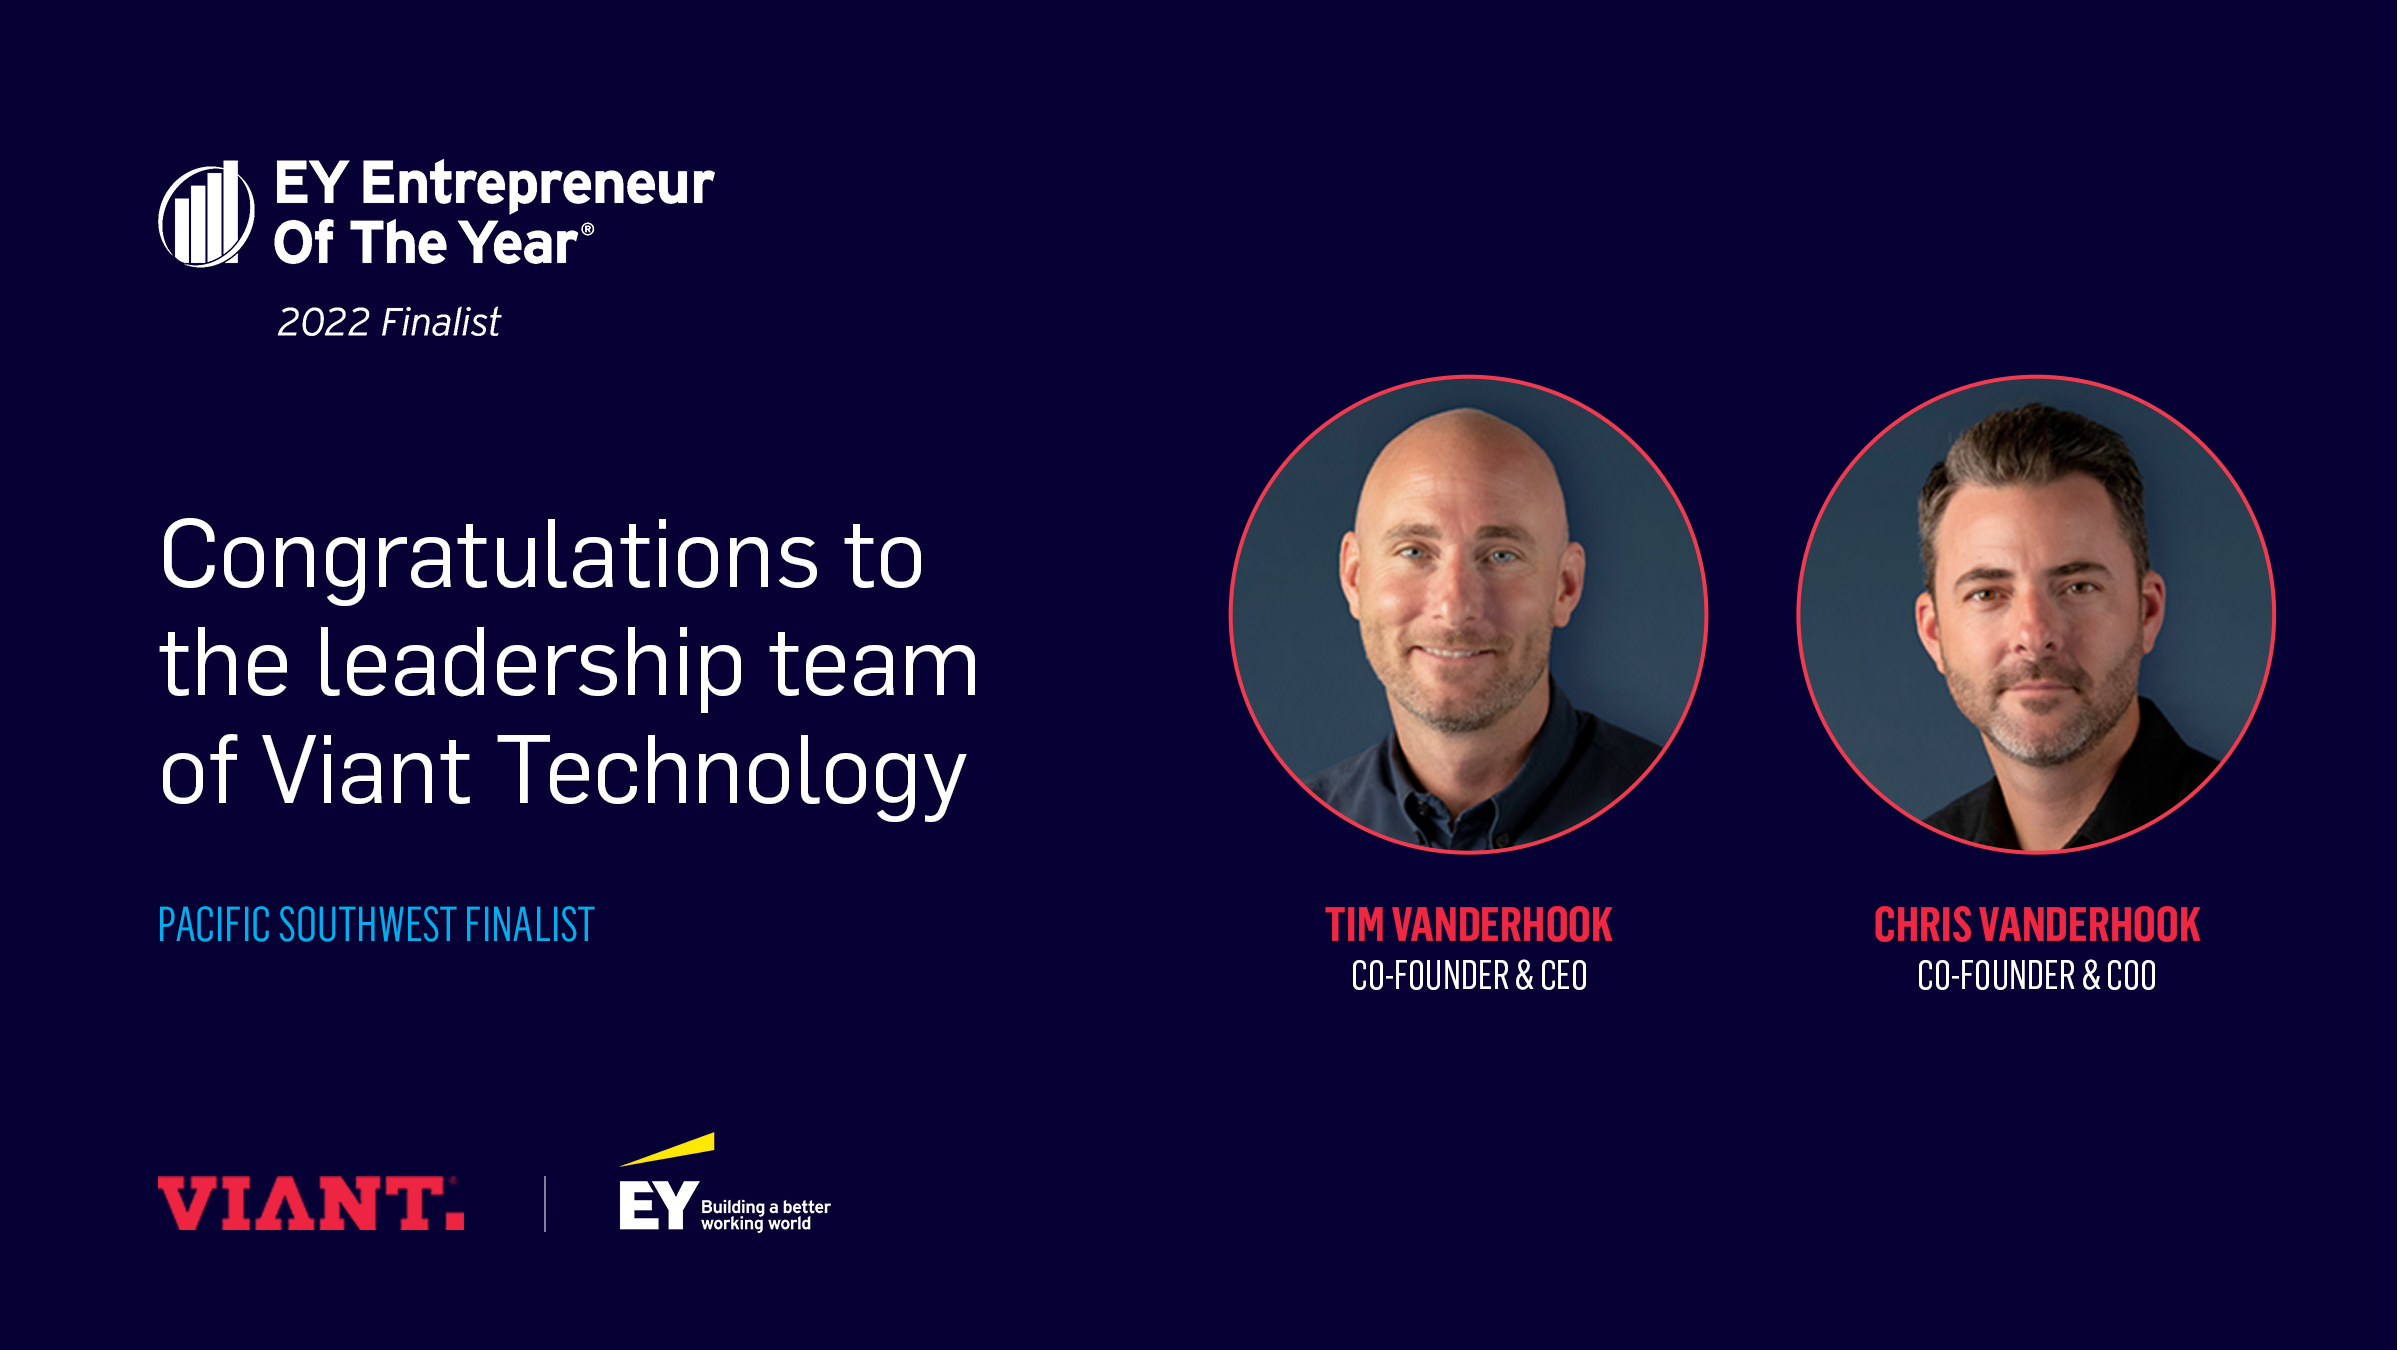 Viant Technology on Twitter: "Congratulations to our Co-Founders Tim Vanderhook and Chris Vanderhook on named for EY's Entrepreneur of The Year Pacific Southwest award in 2022 🎉 #EntrepreneurOfTheYear #Finalists https://t.co/oclfK8sBWd" /